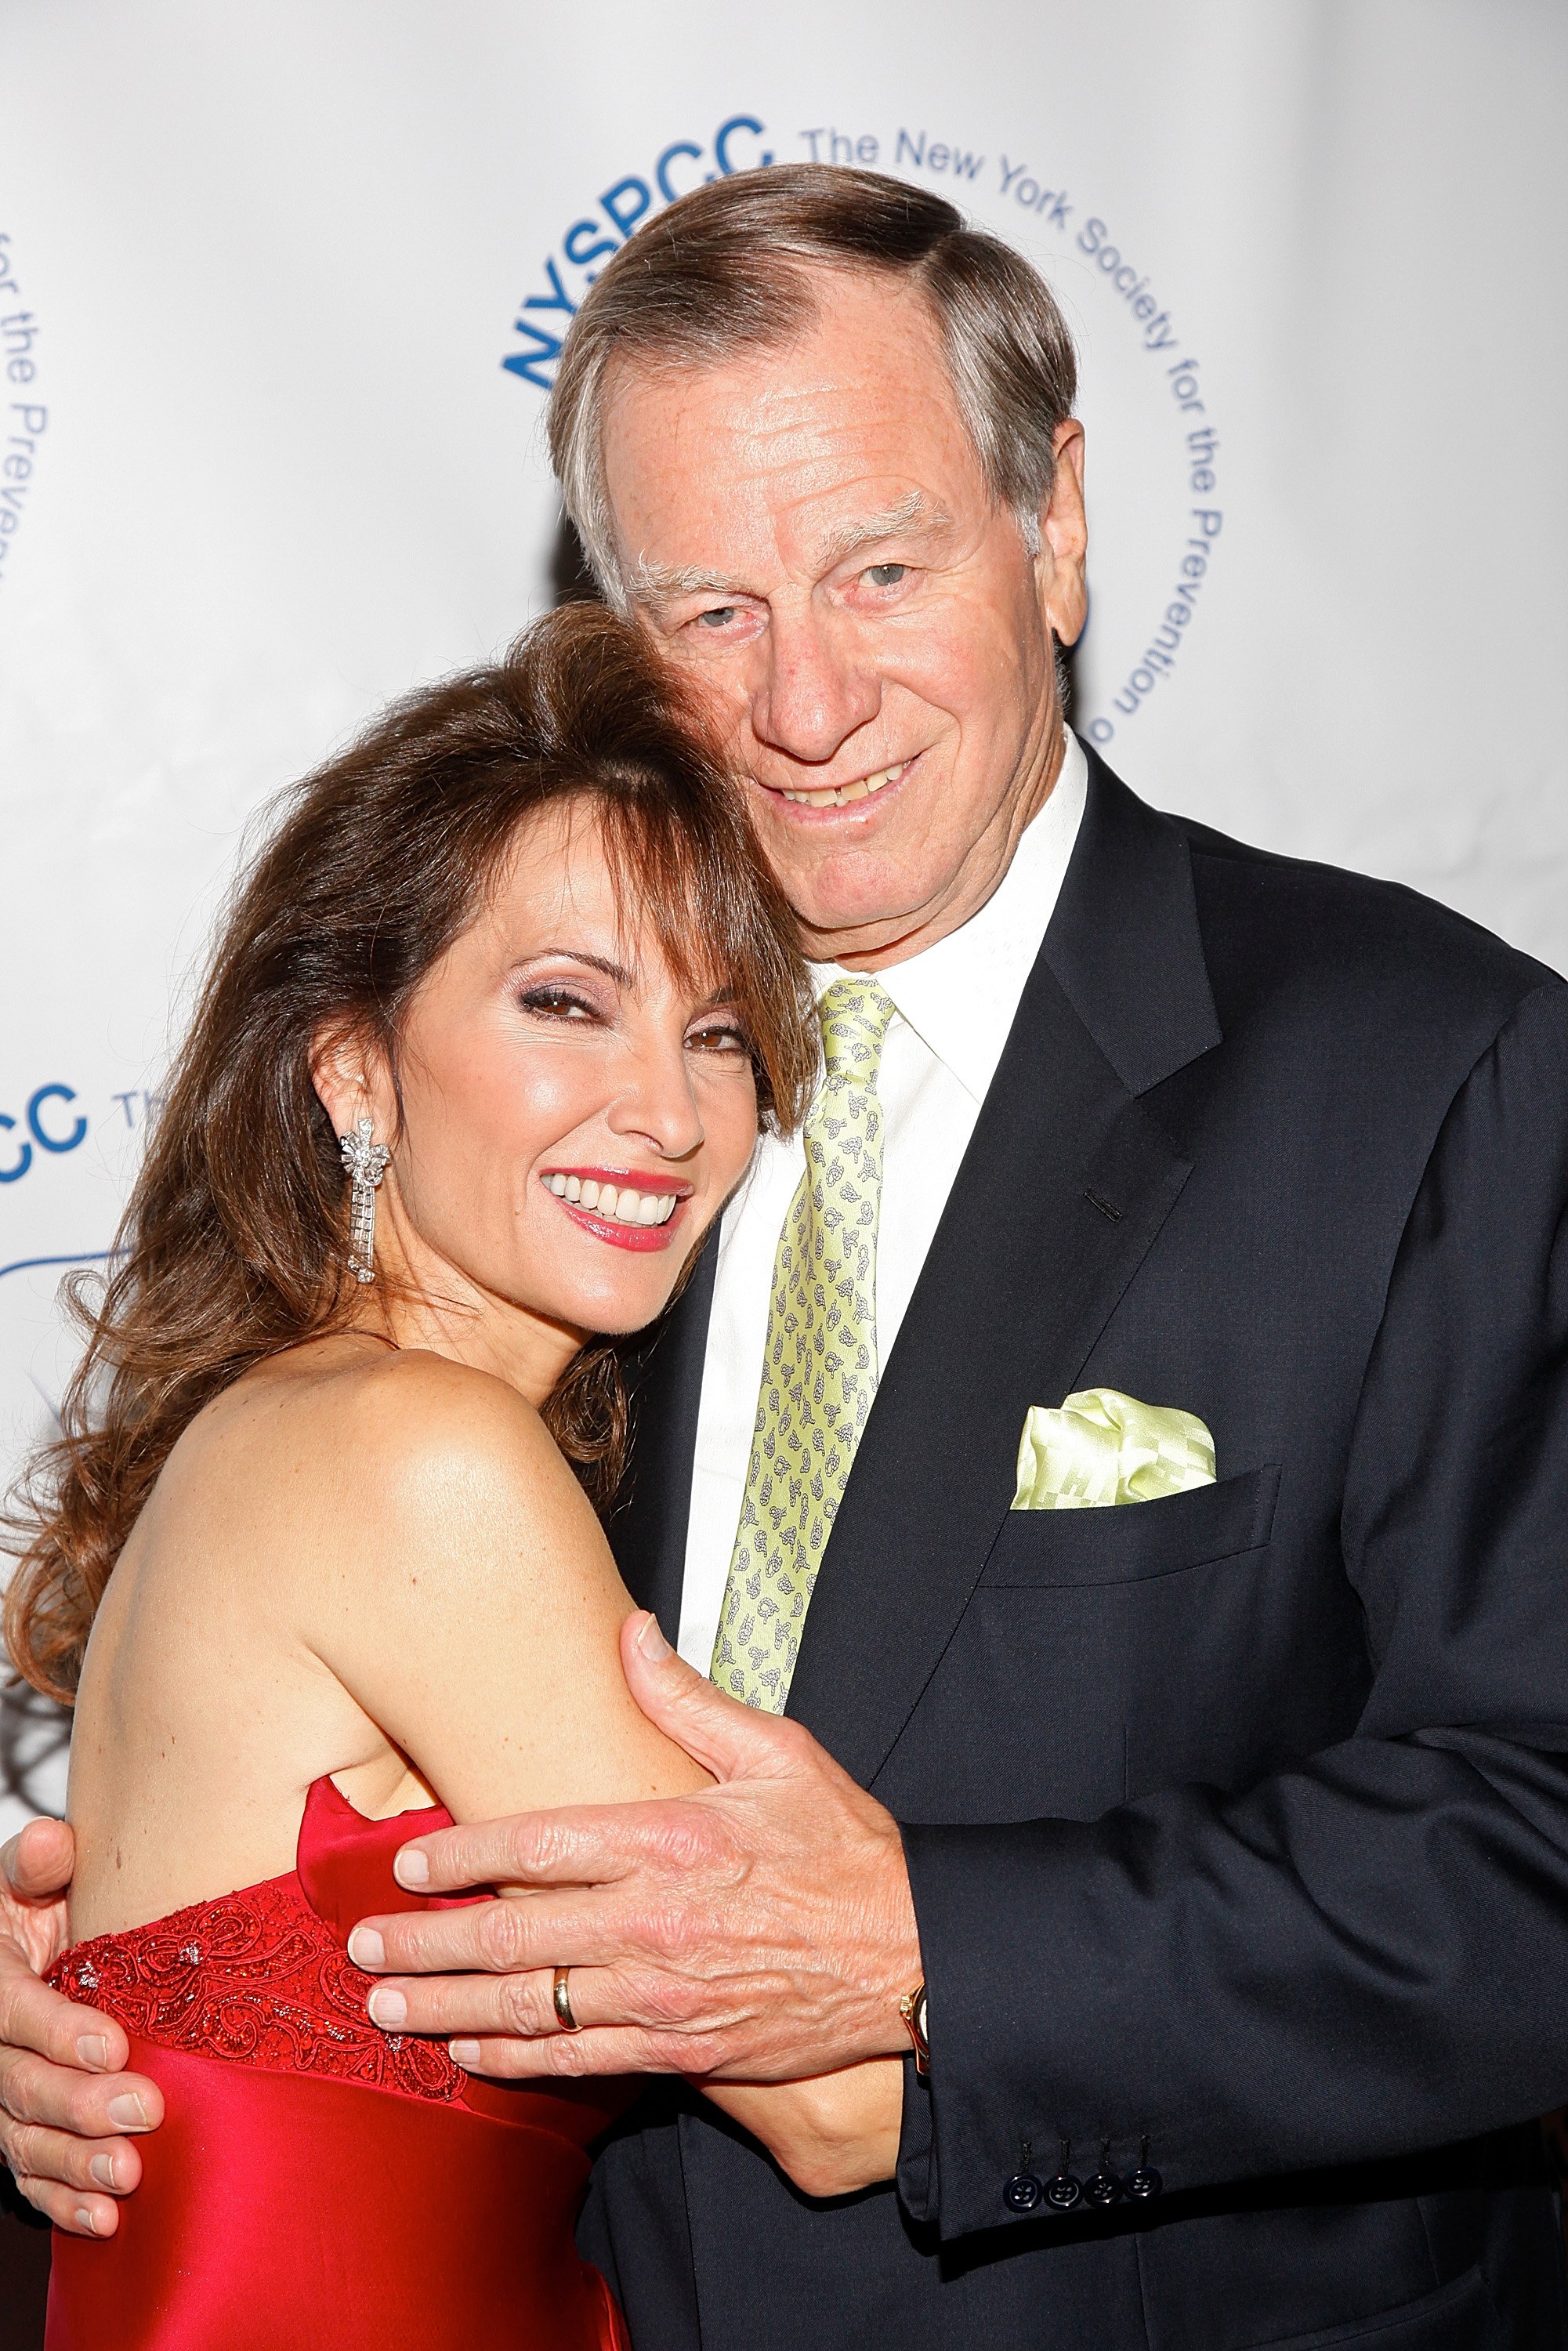 Susan Lucci and husband, producer Helmut Huber attend the 2009 Child Protection Agency's Gala at 583 Park Avenue on October 26, 2009 in New York City | Source: Getty Images